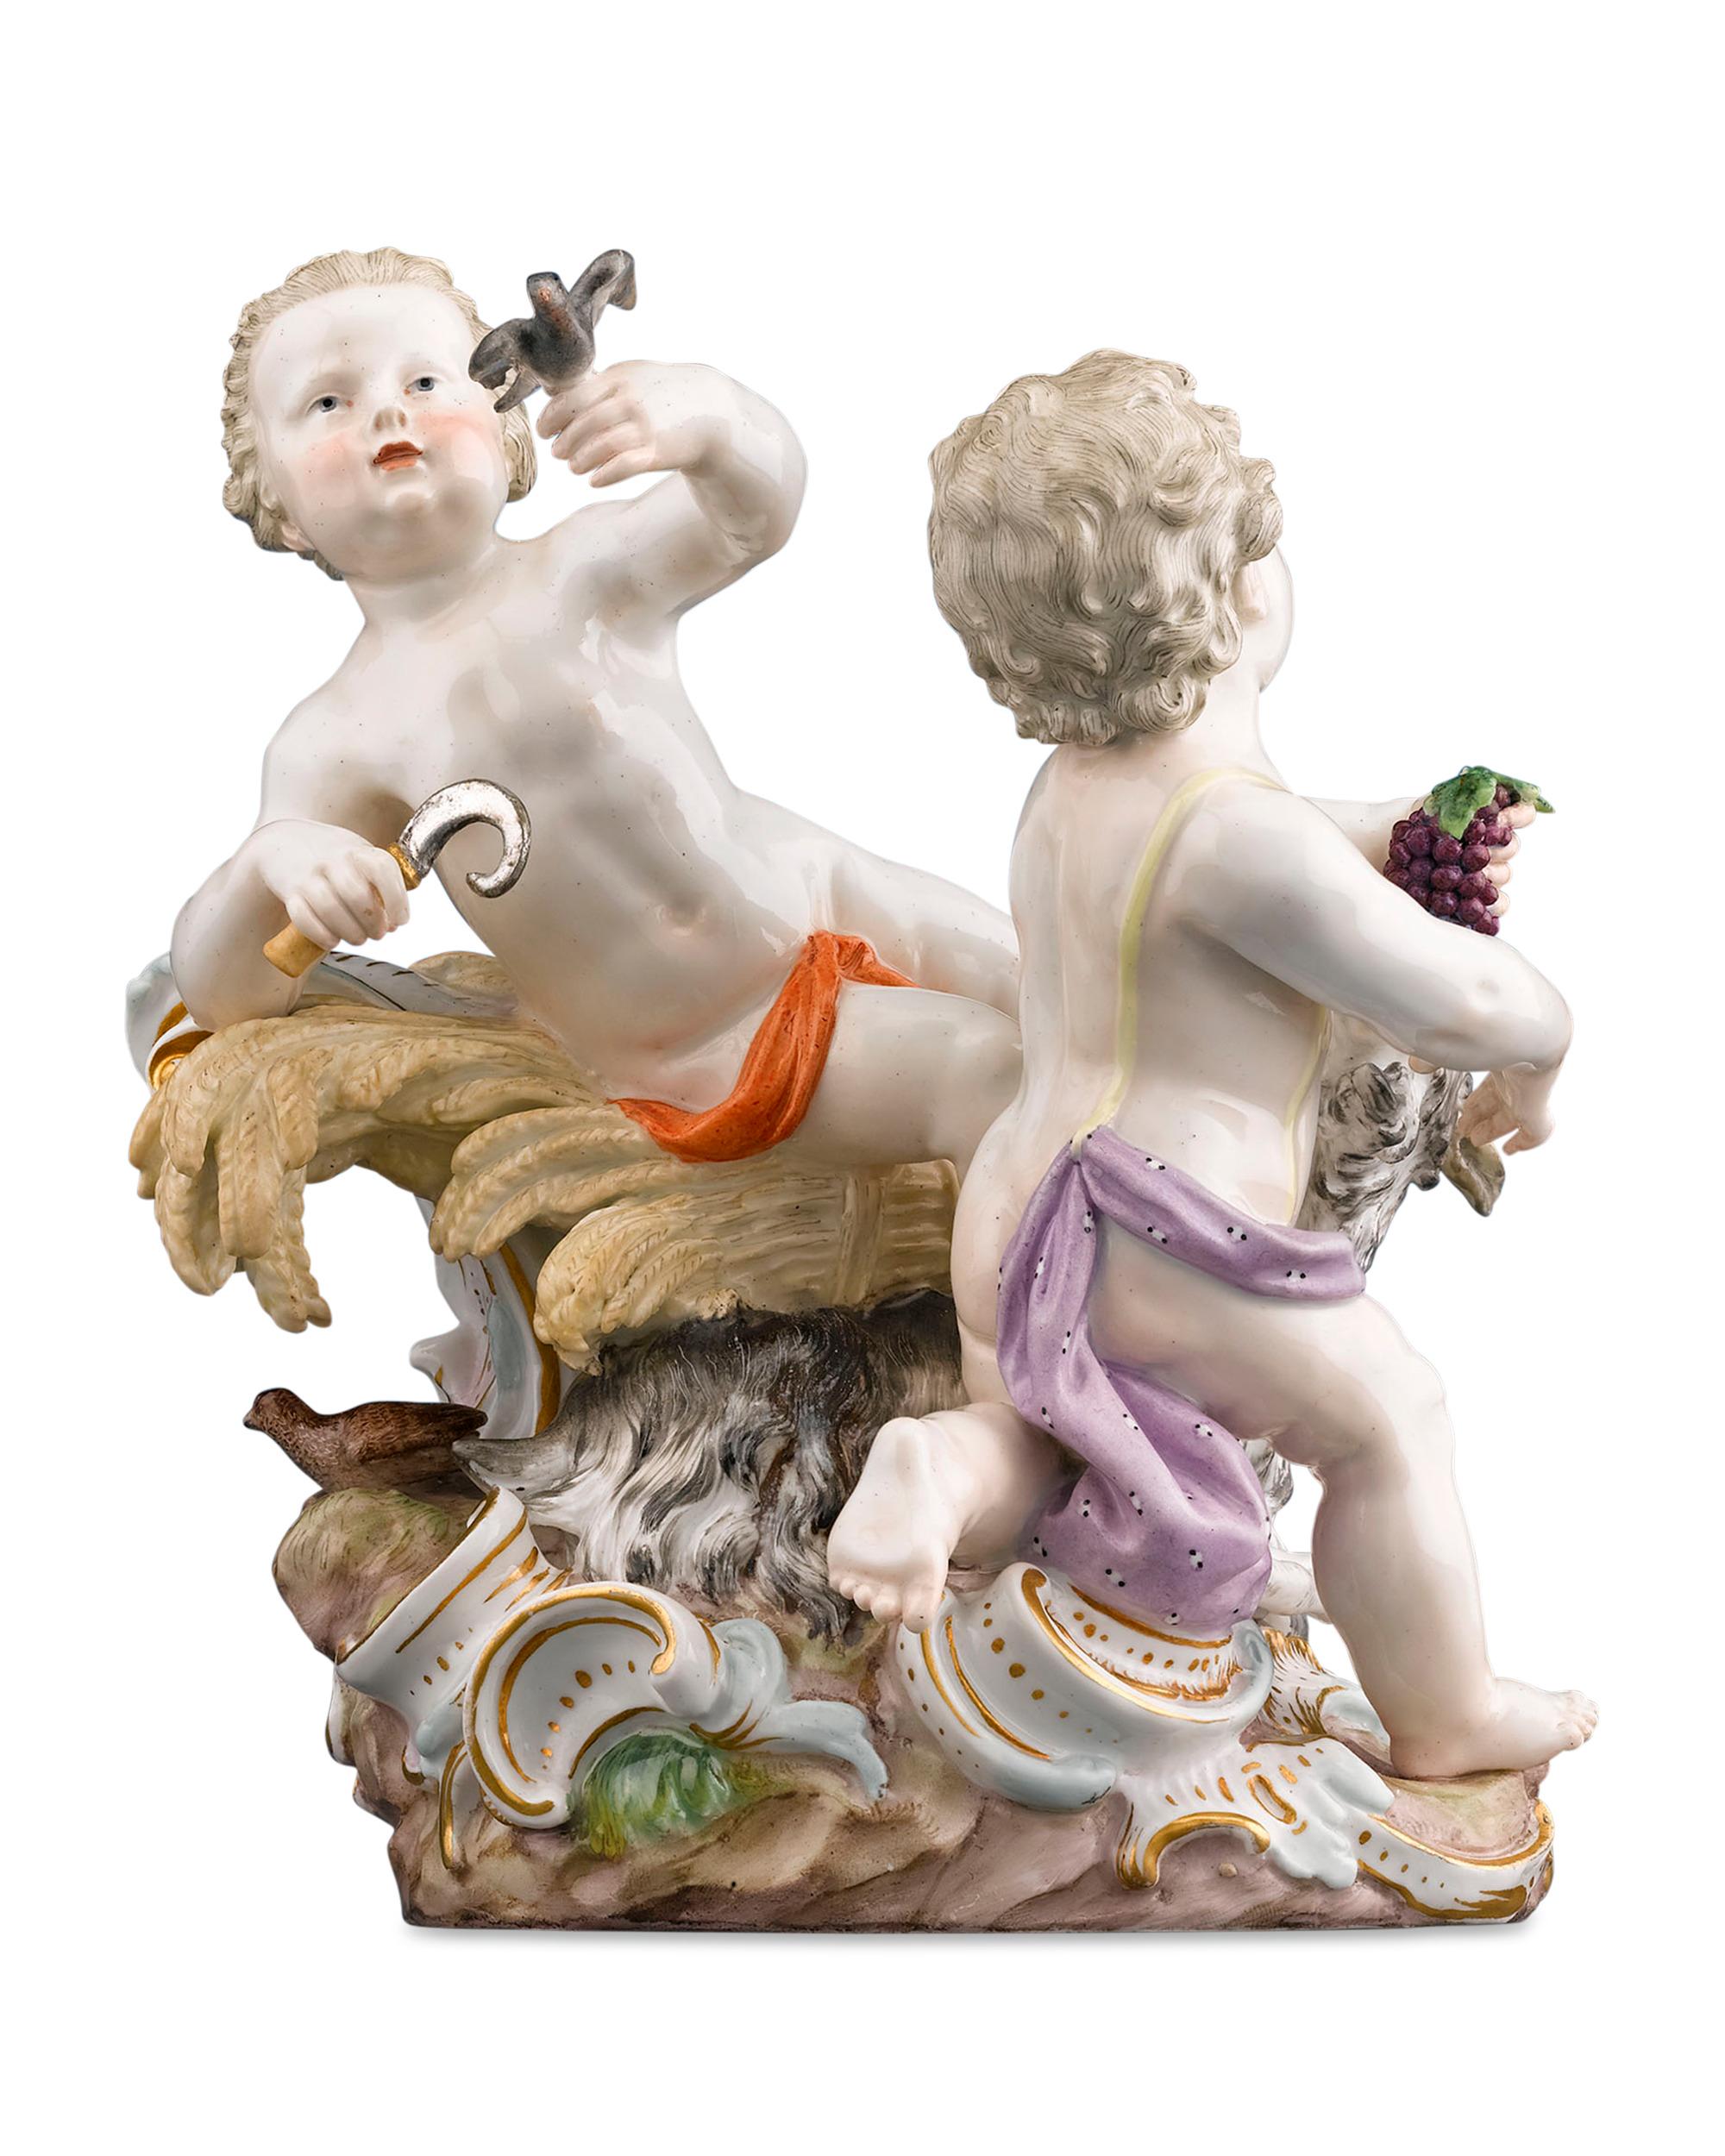 This beautiful Meissen Porcelain figure entitled Summer and Fall is part of the company's beloved Seasons series. The putti rest upon a rocaille-formed base holding representations of their respective seasons: Fall is signified by the harvesting of